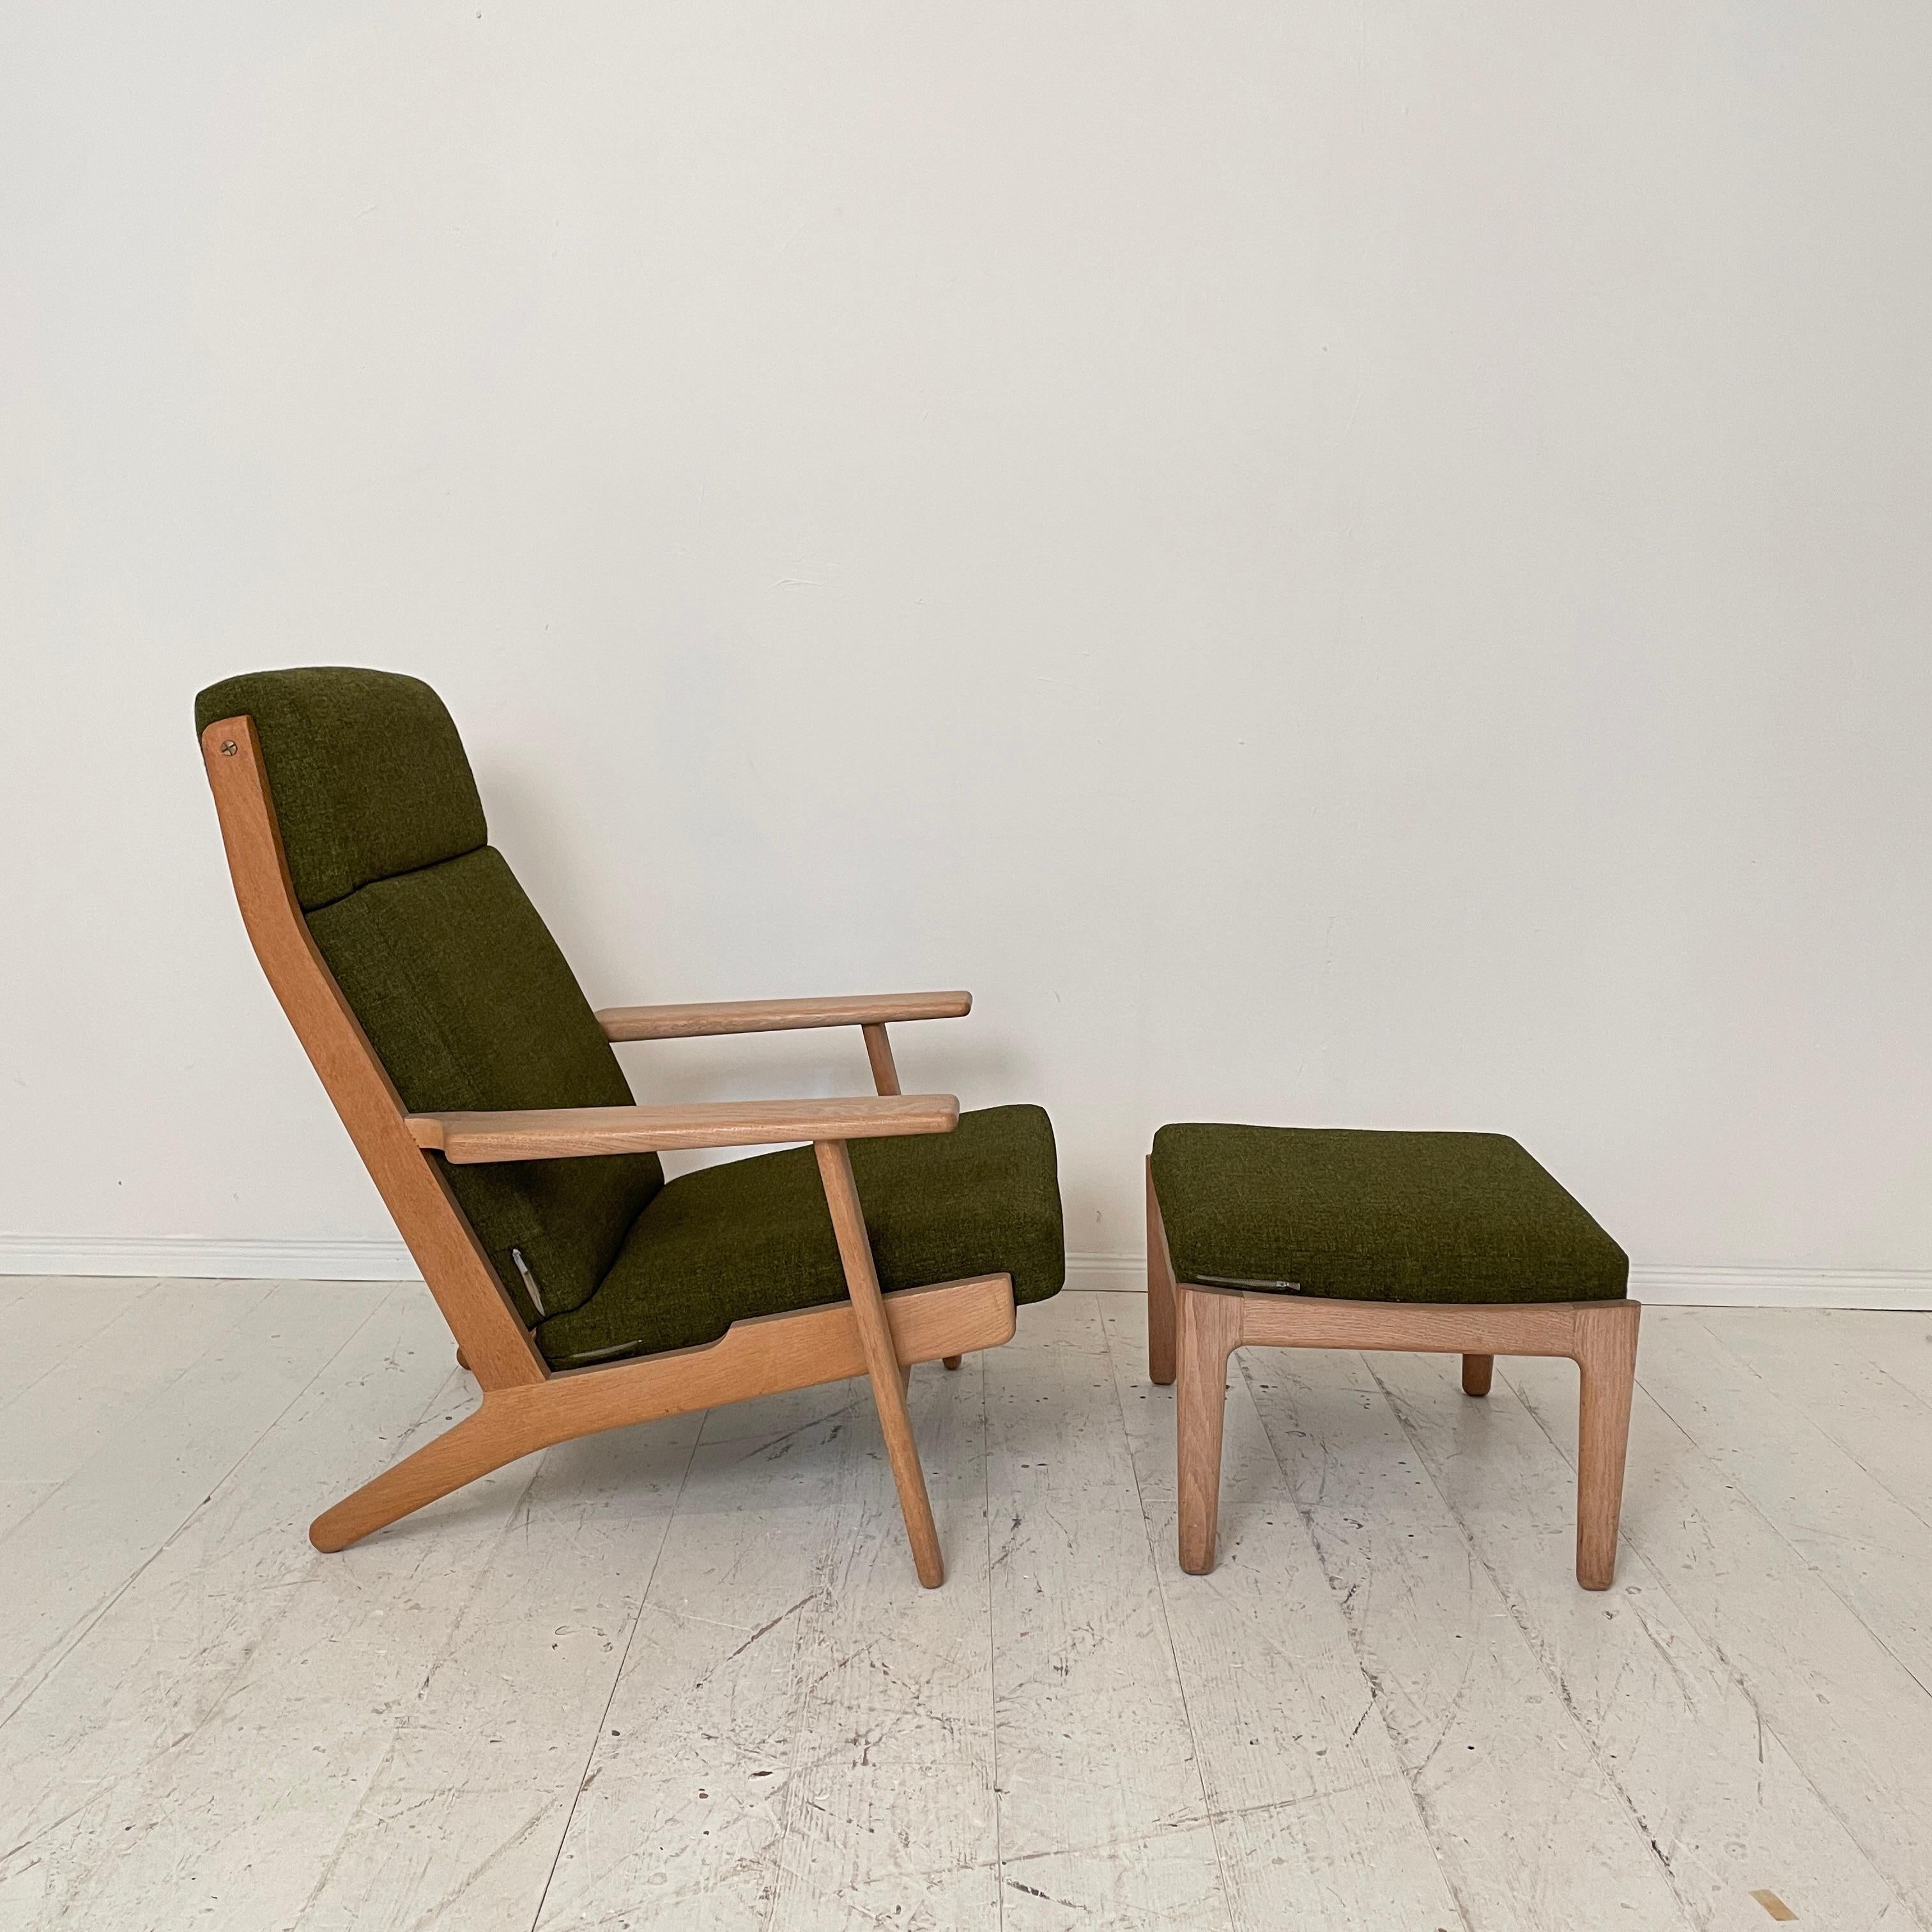 This Mid Century lounge chair with ottoman GE290A by Hans J. Wegner for GETAMA was made in the 1970s.
The chair remains it original green wool fabric which is in fantastic condition as well as the oak chair and oak ottoman.
It is stamped